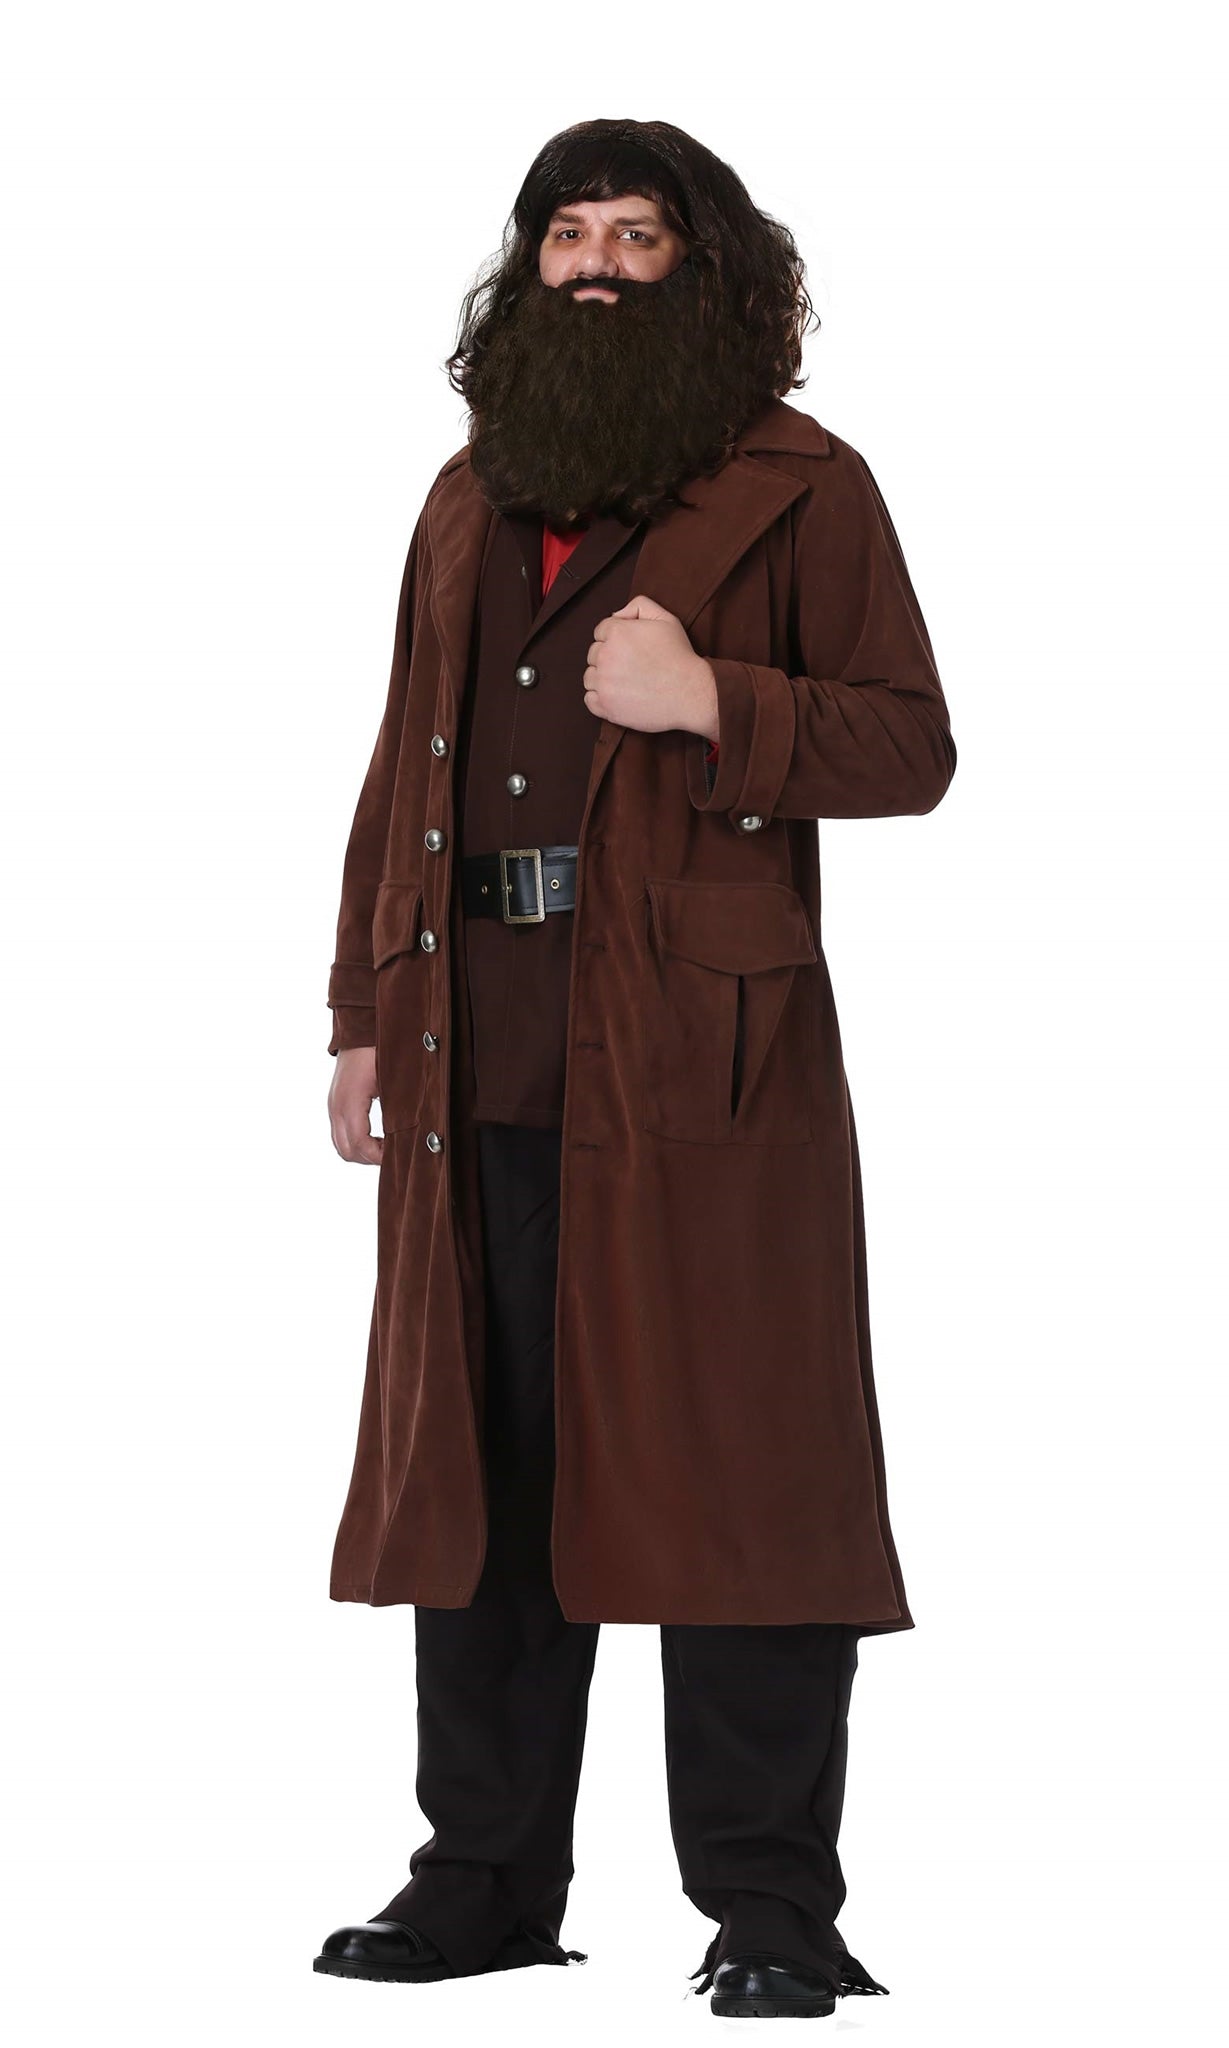 Hagrid costume with wig and beard